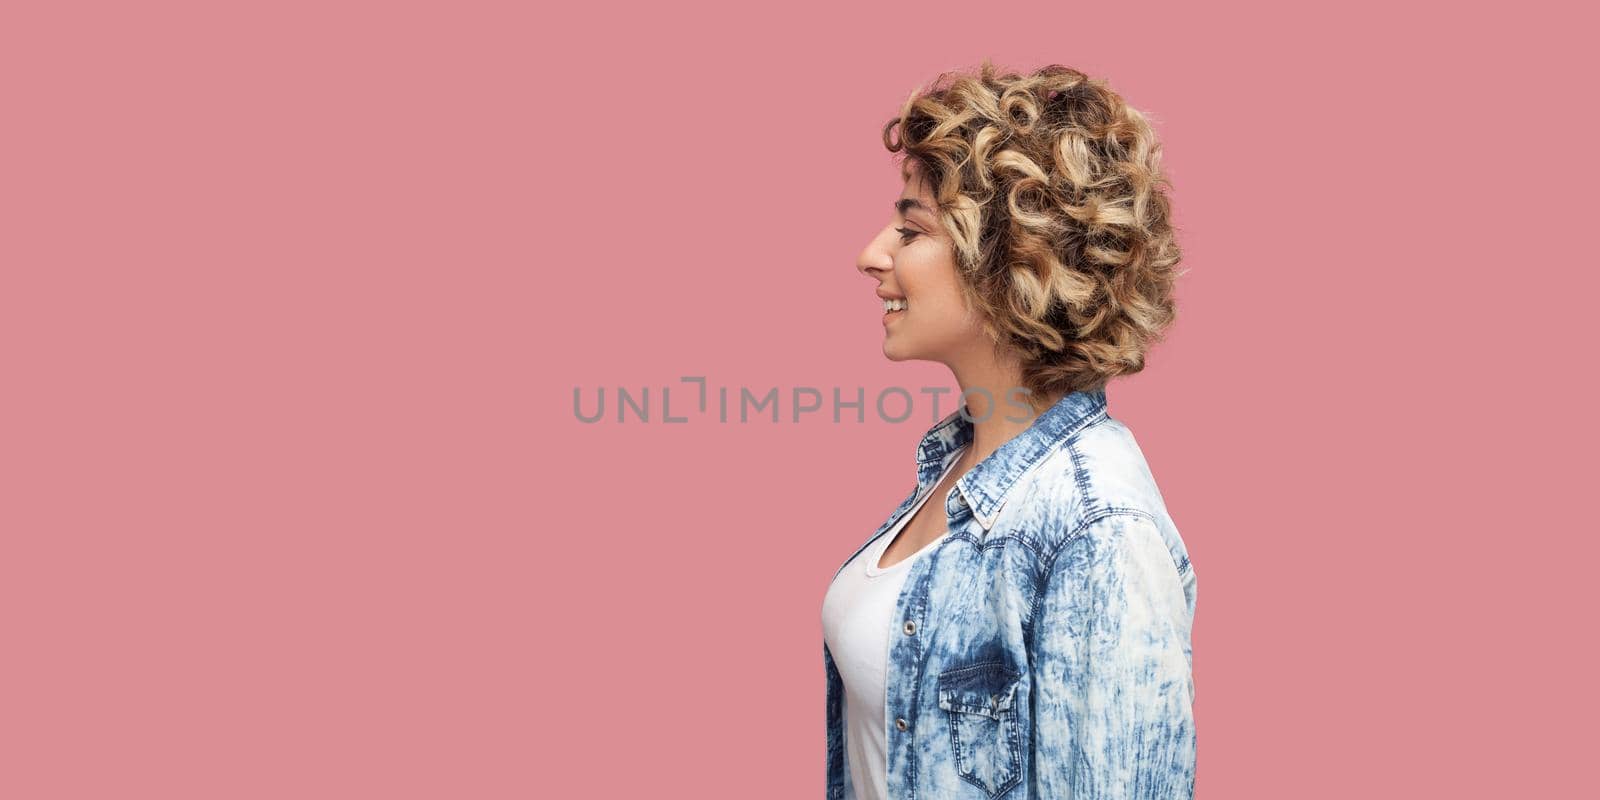 Profile side view portrait of young happy woman with makeup and blonde curly hairstyle in casual blue shirt standing, looking forward with toothy smile. indoor studio shot, isolated on pink background